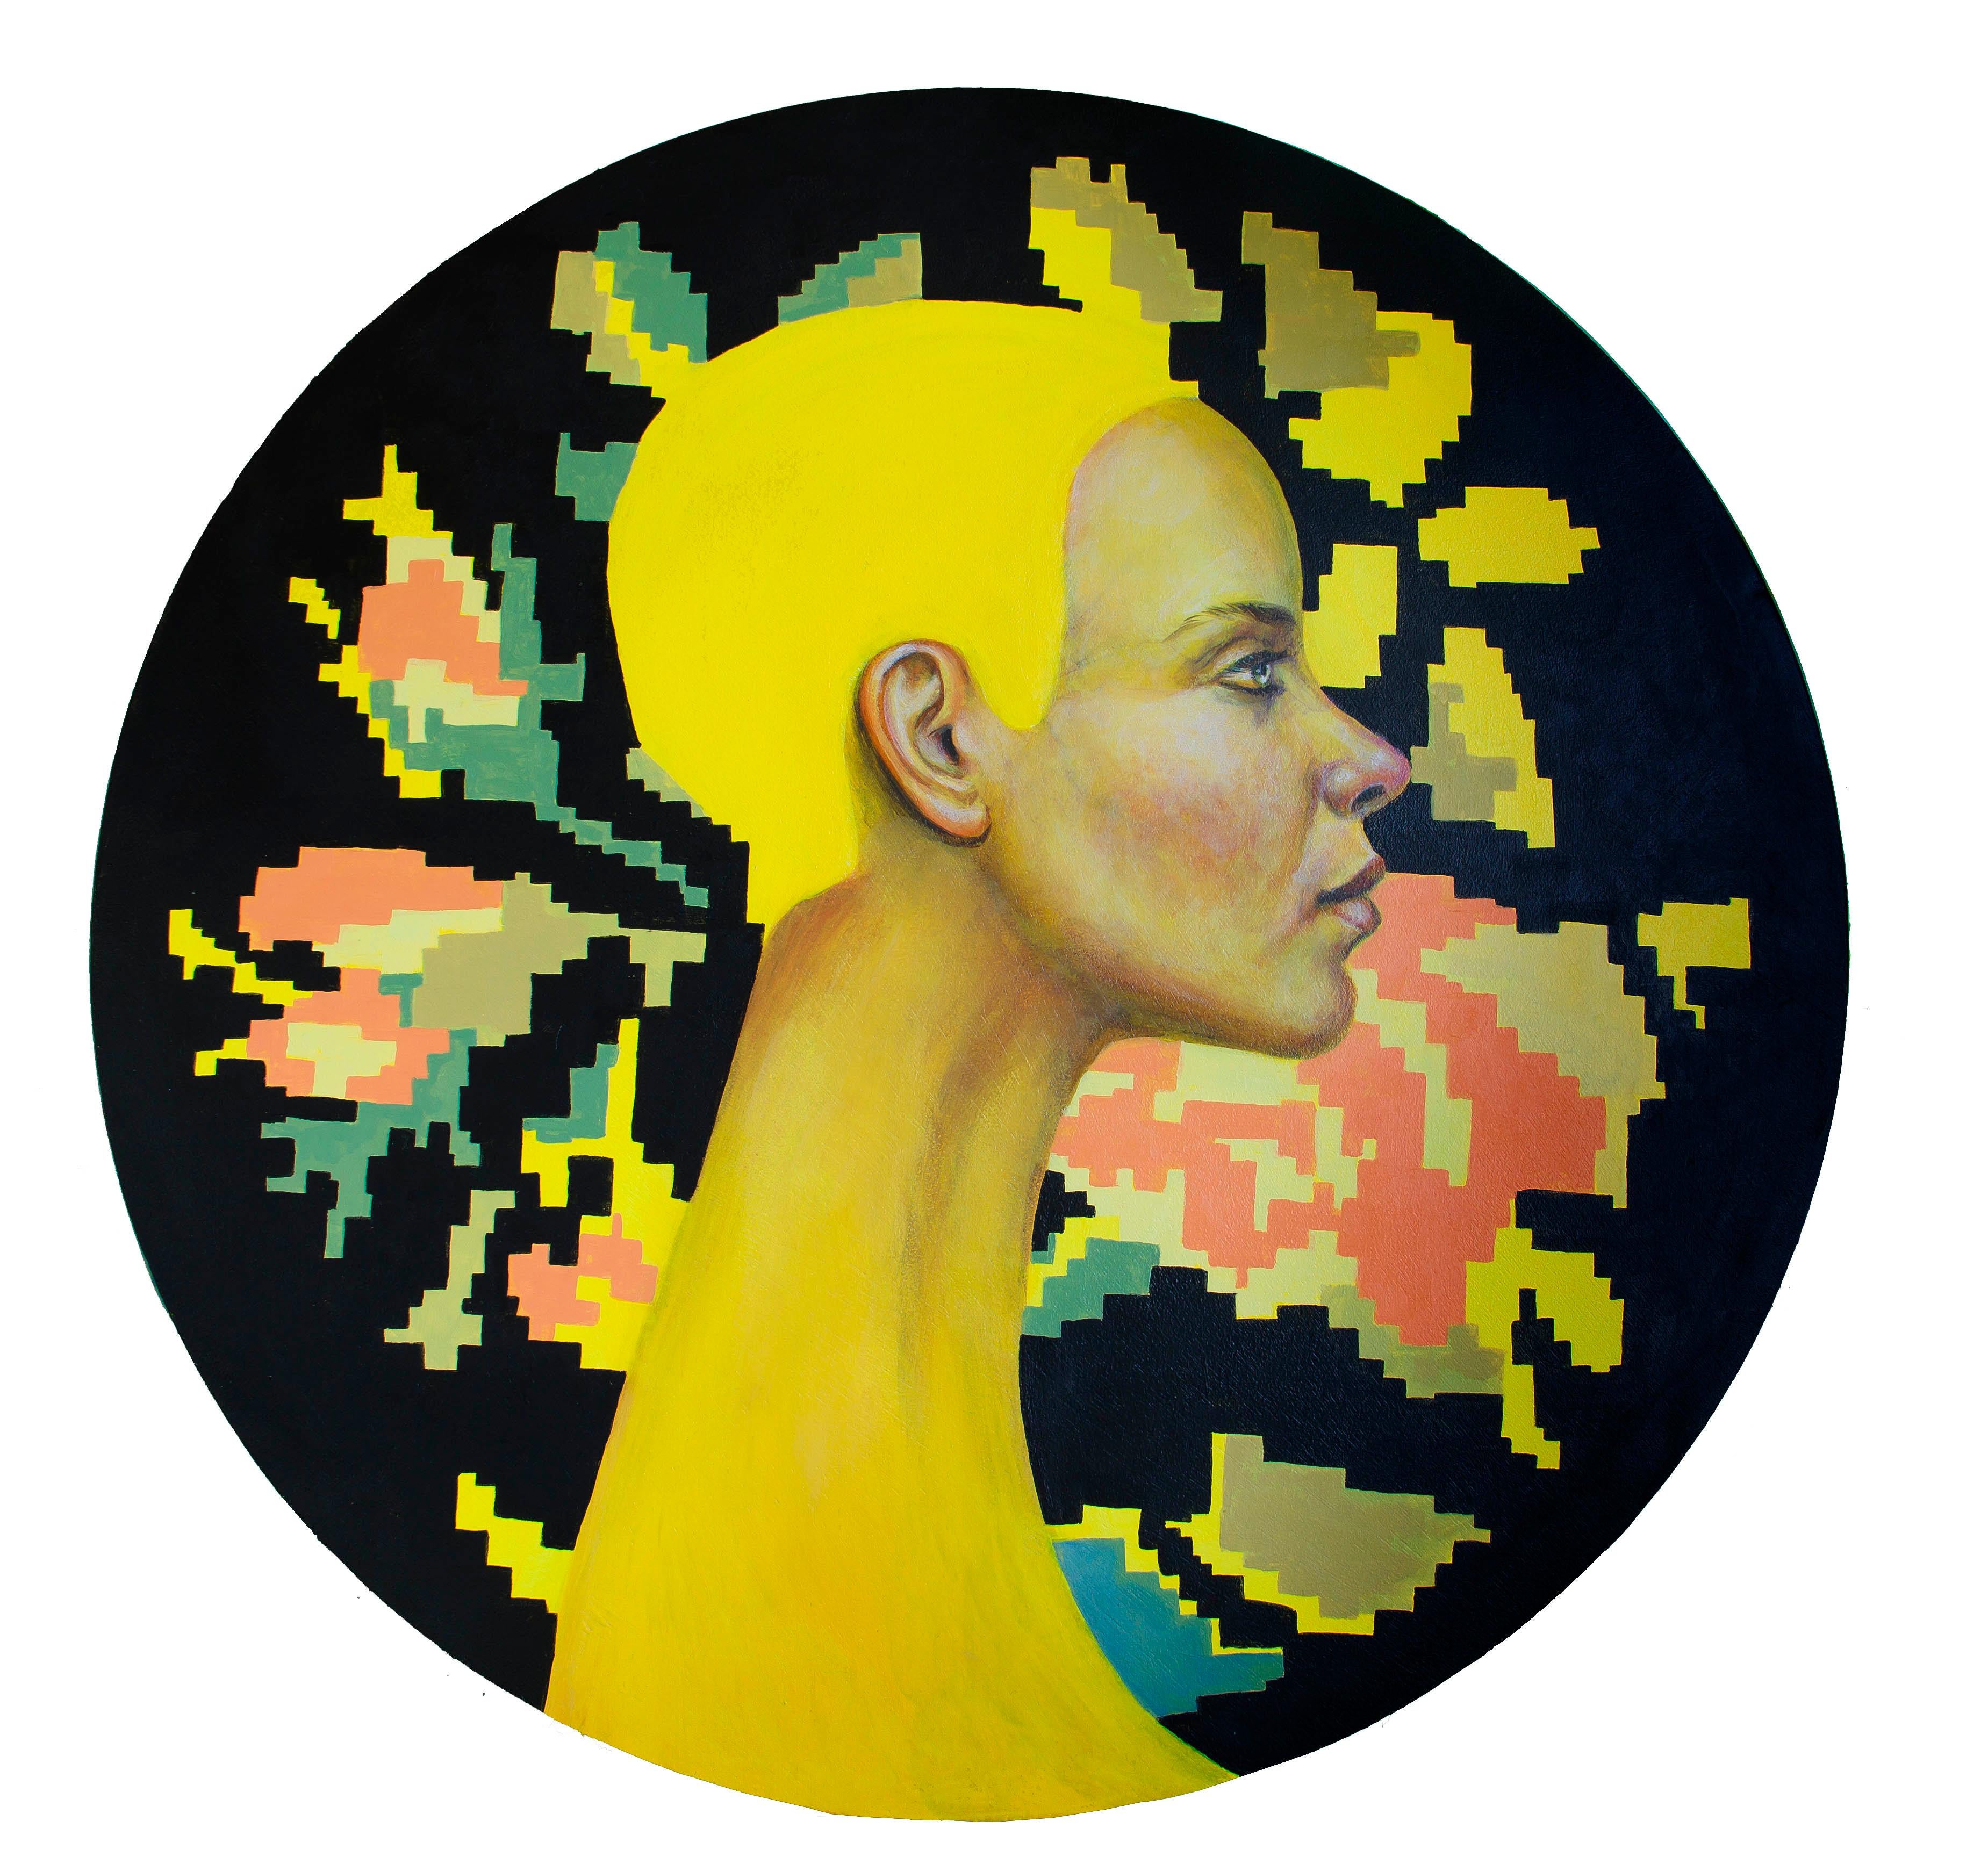 Natasha Lelenco Figurative Painting - Colorful Portrait On a Wooden Circle. Woman with Flowers. Yellow, "Currency #4" 